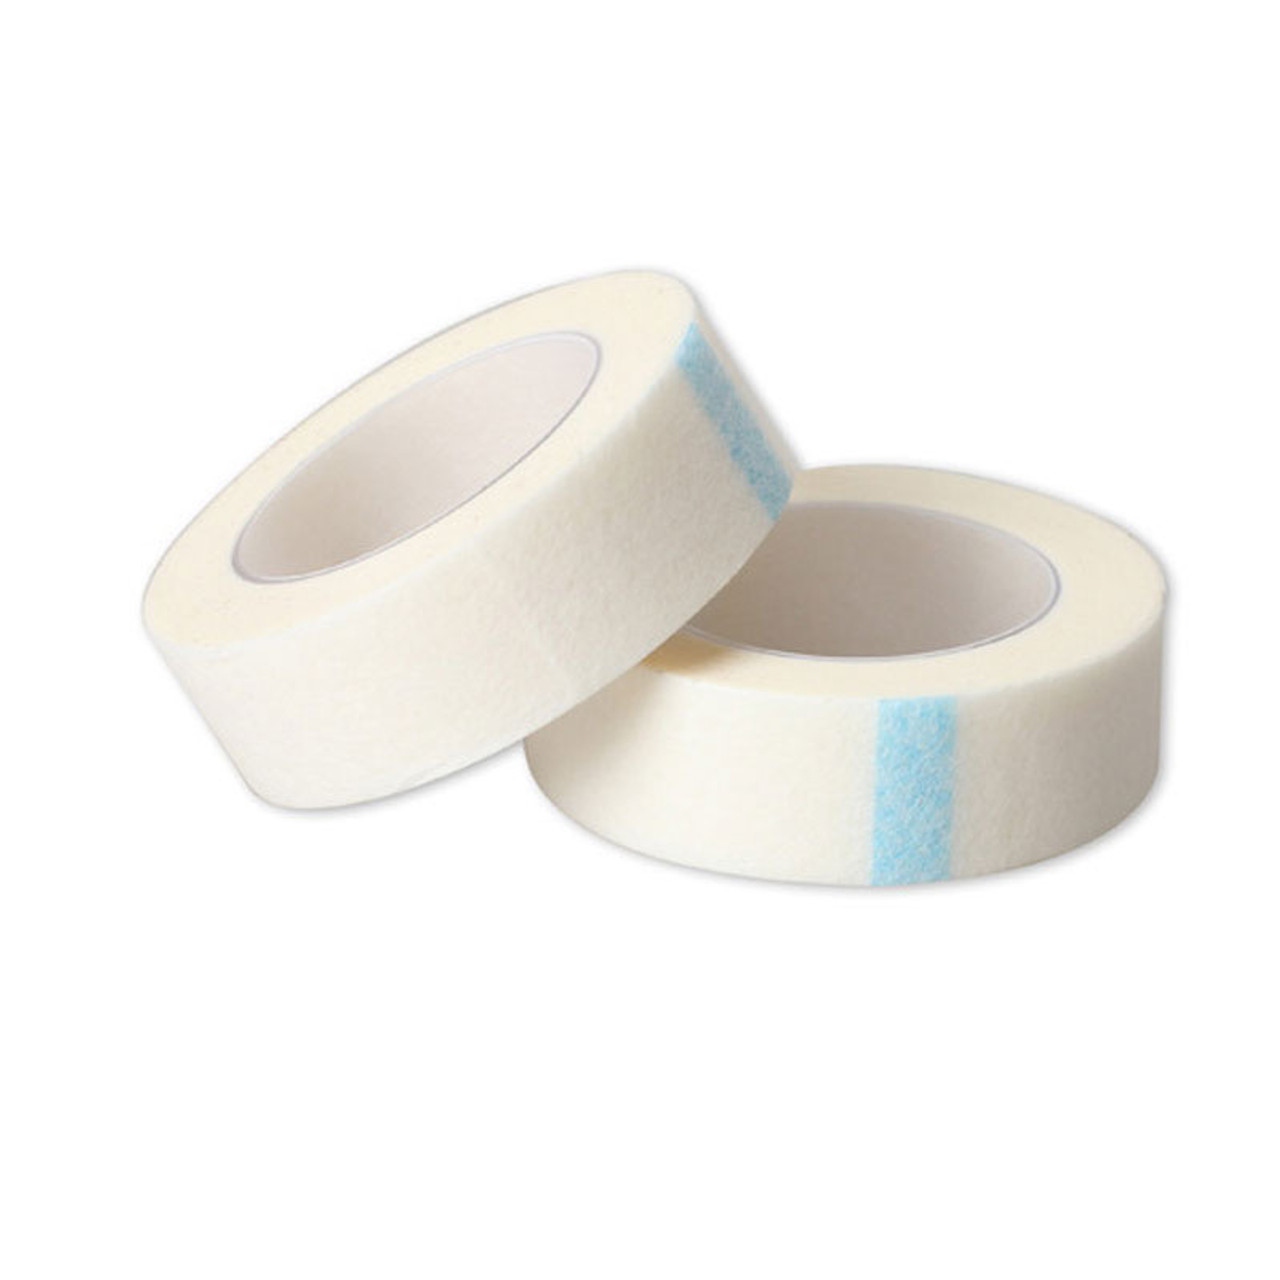  3M Micropore Paper Tape - White, 1/2 Wide - 1 Roll : Office  Products